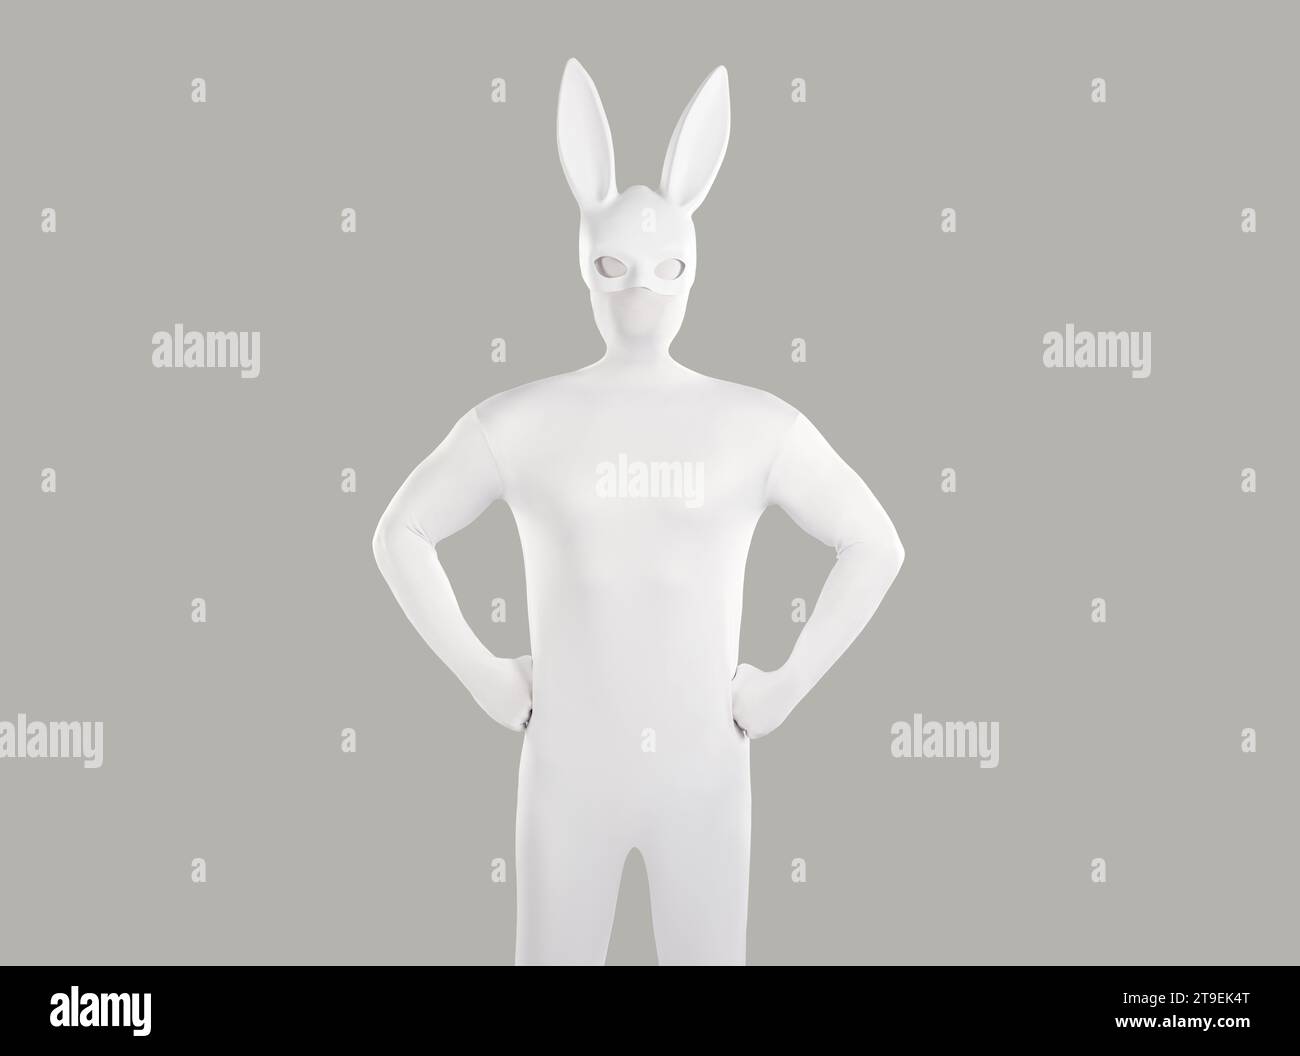 Portrait of unrecognizable person wearing white spandex costume and hare mask with long ears. Stock Photo